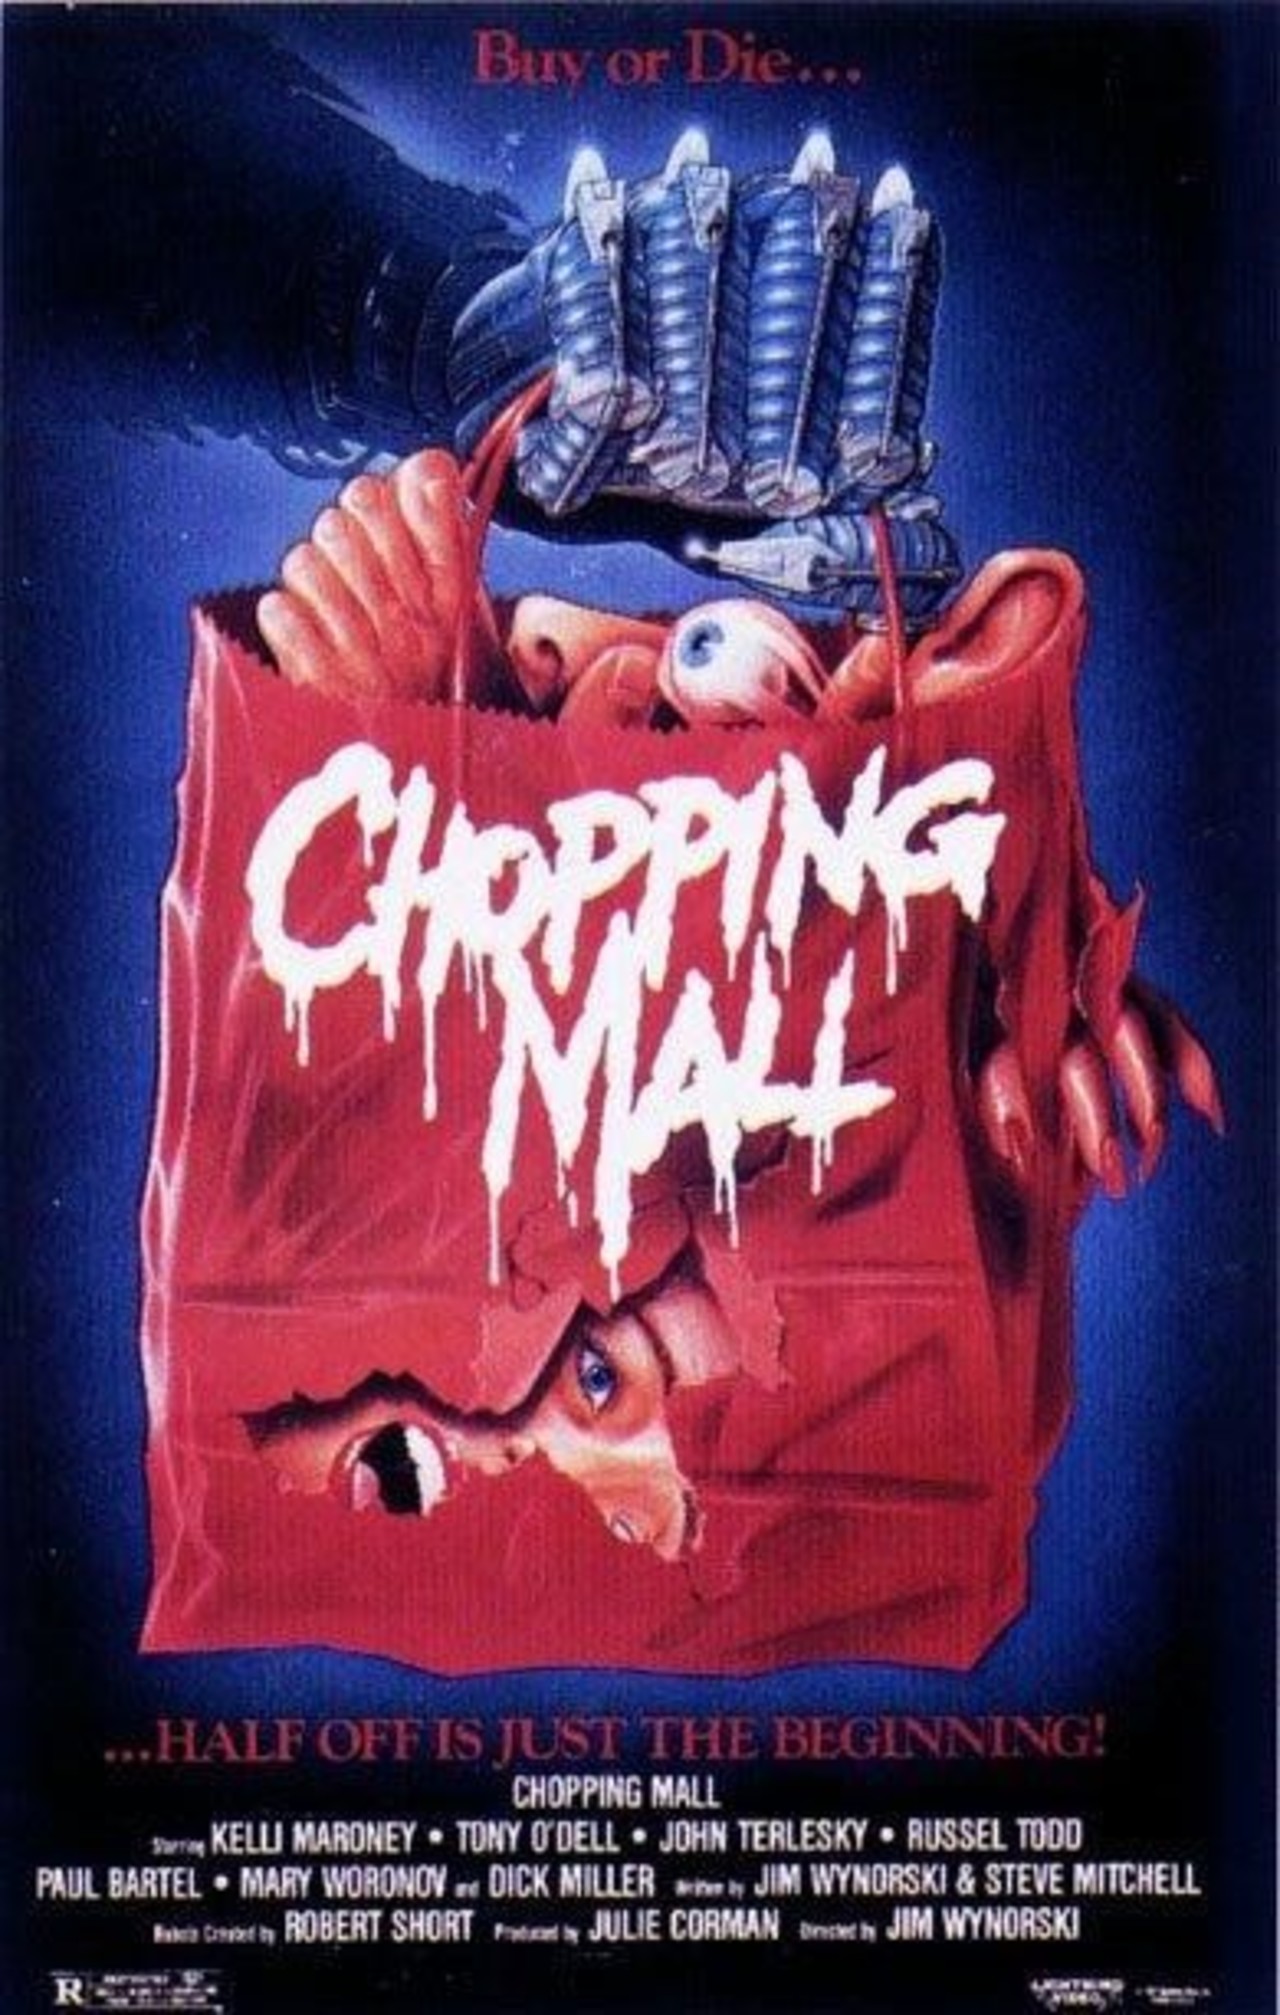 What was killing people at the mall in the movie Chopping Mall (1986)?